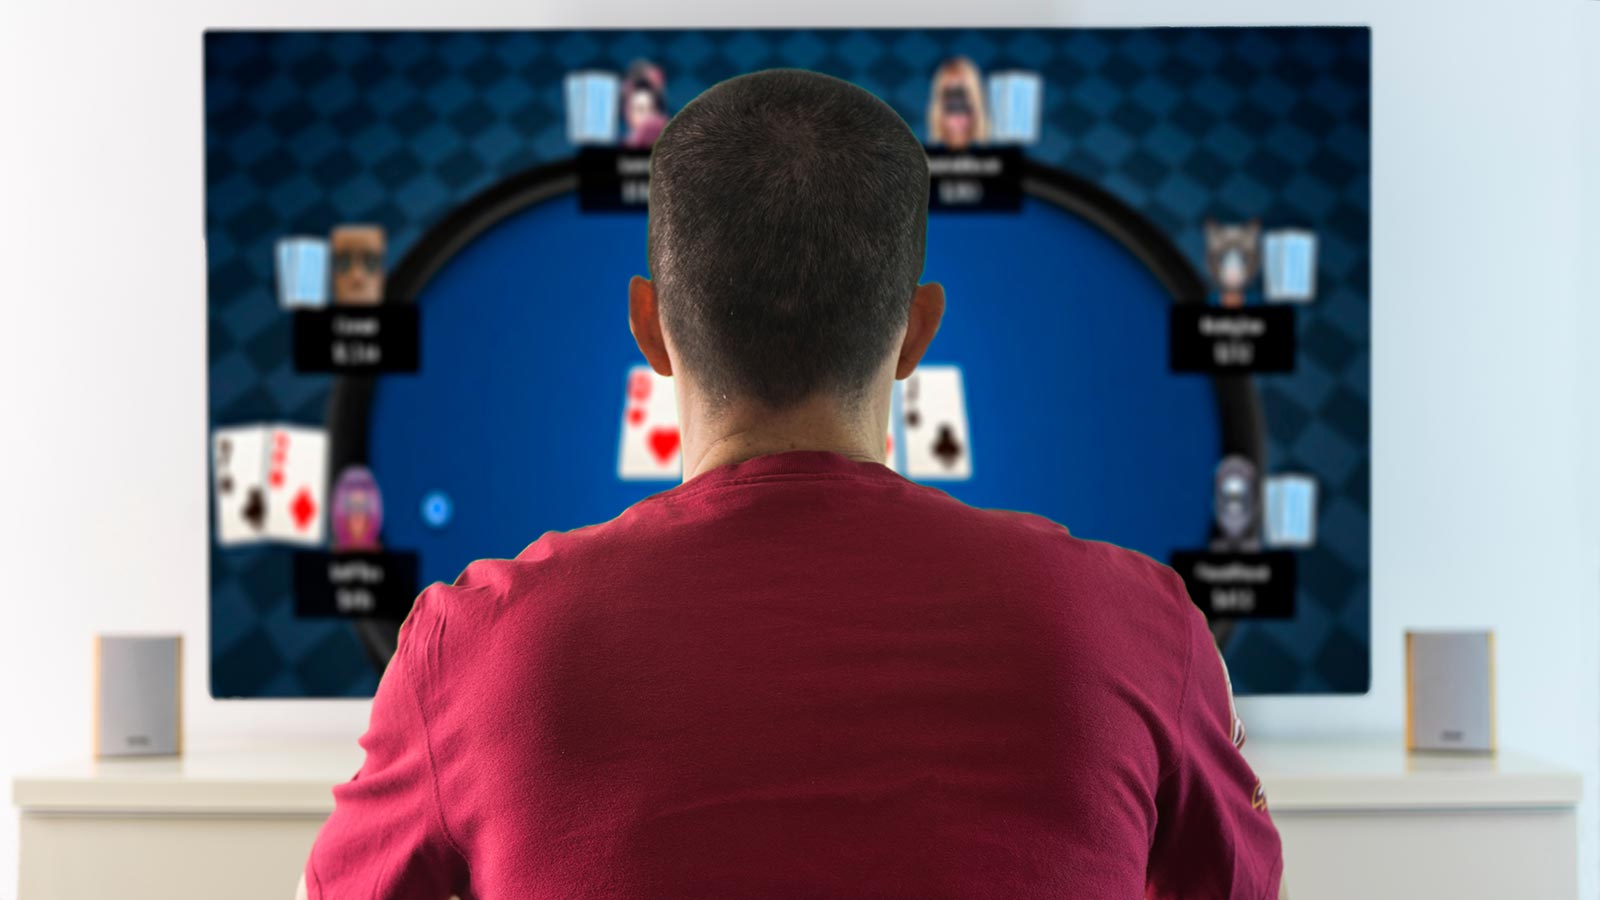 How to identify gambling addiction